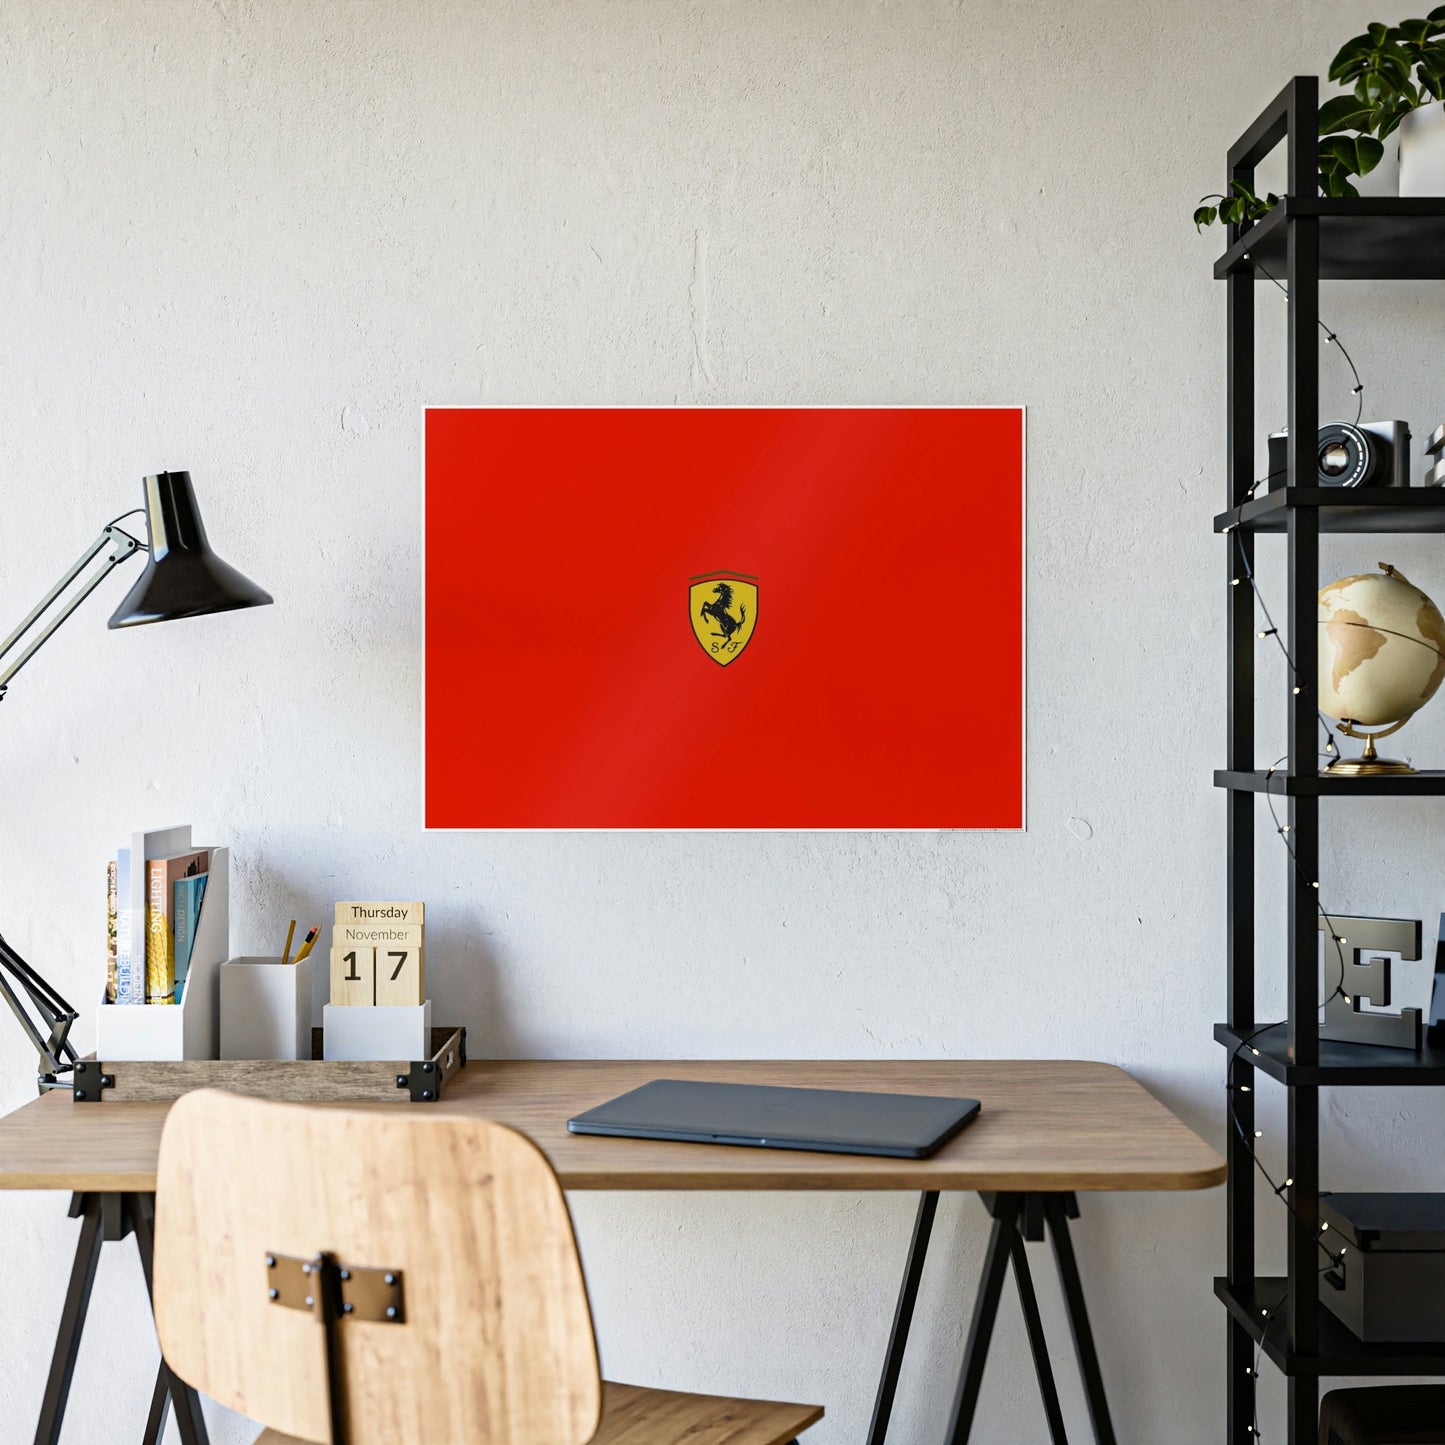 Prancing Horse: Framed Canvas and Poster of Ferrari's Iconic Symbol